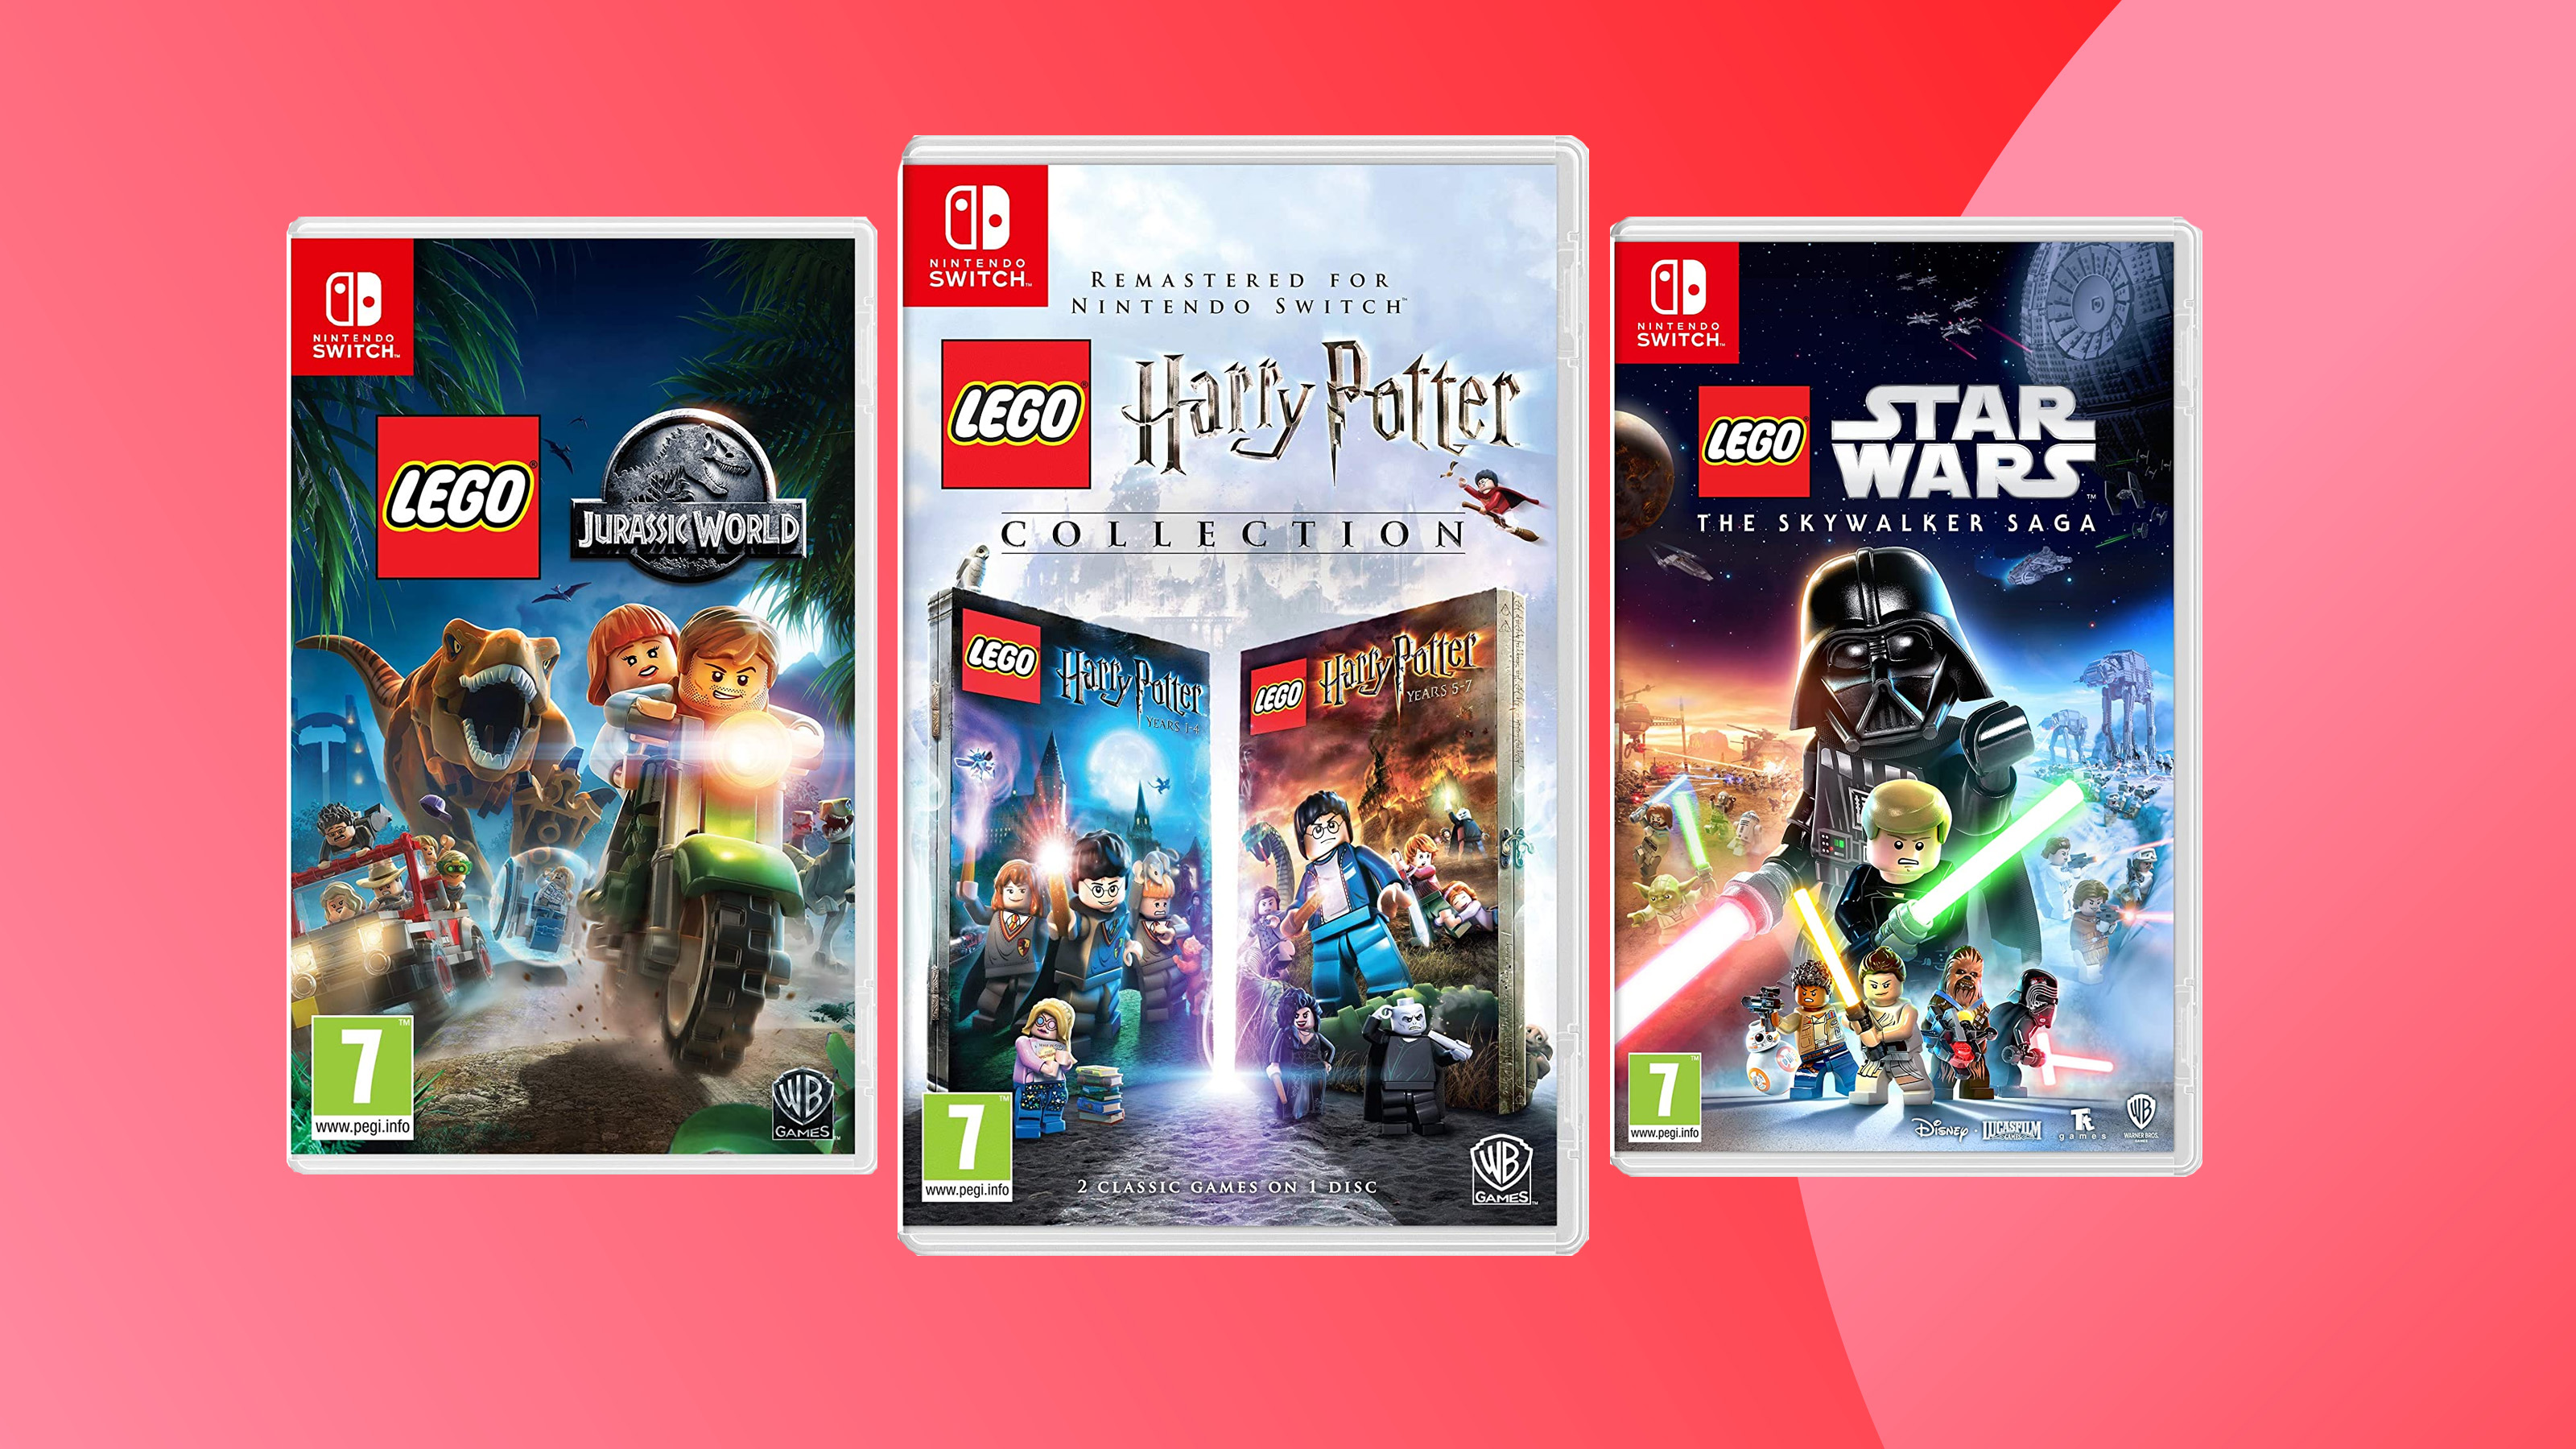 product photos of various LEGO Switch games on a colorful background